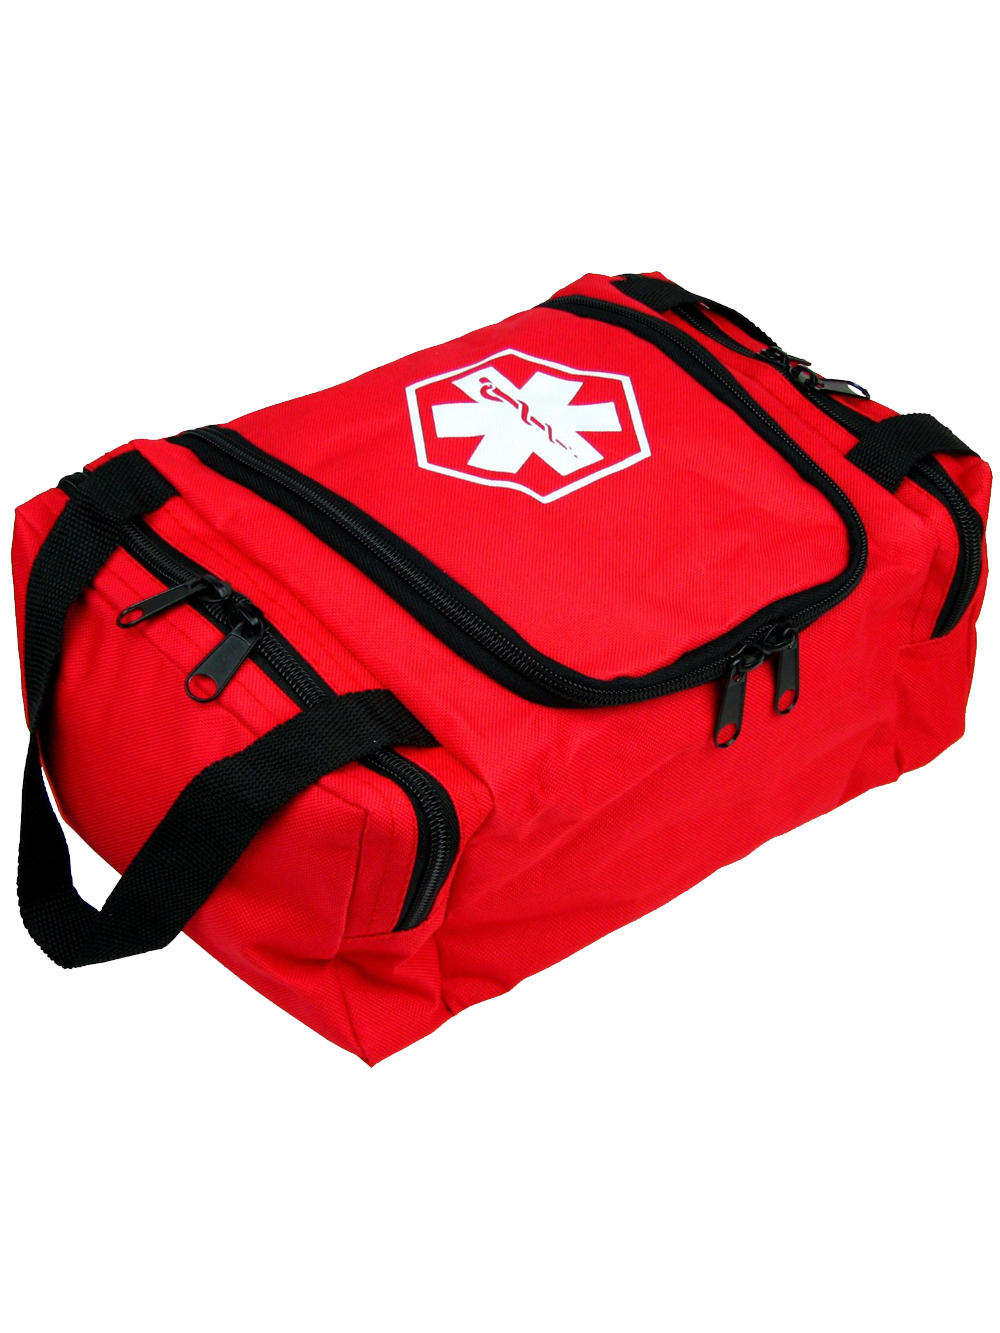 first responder first aid kits